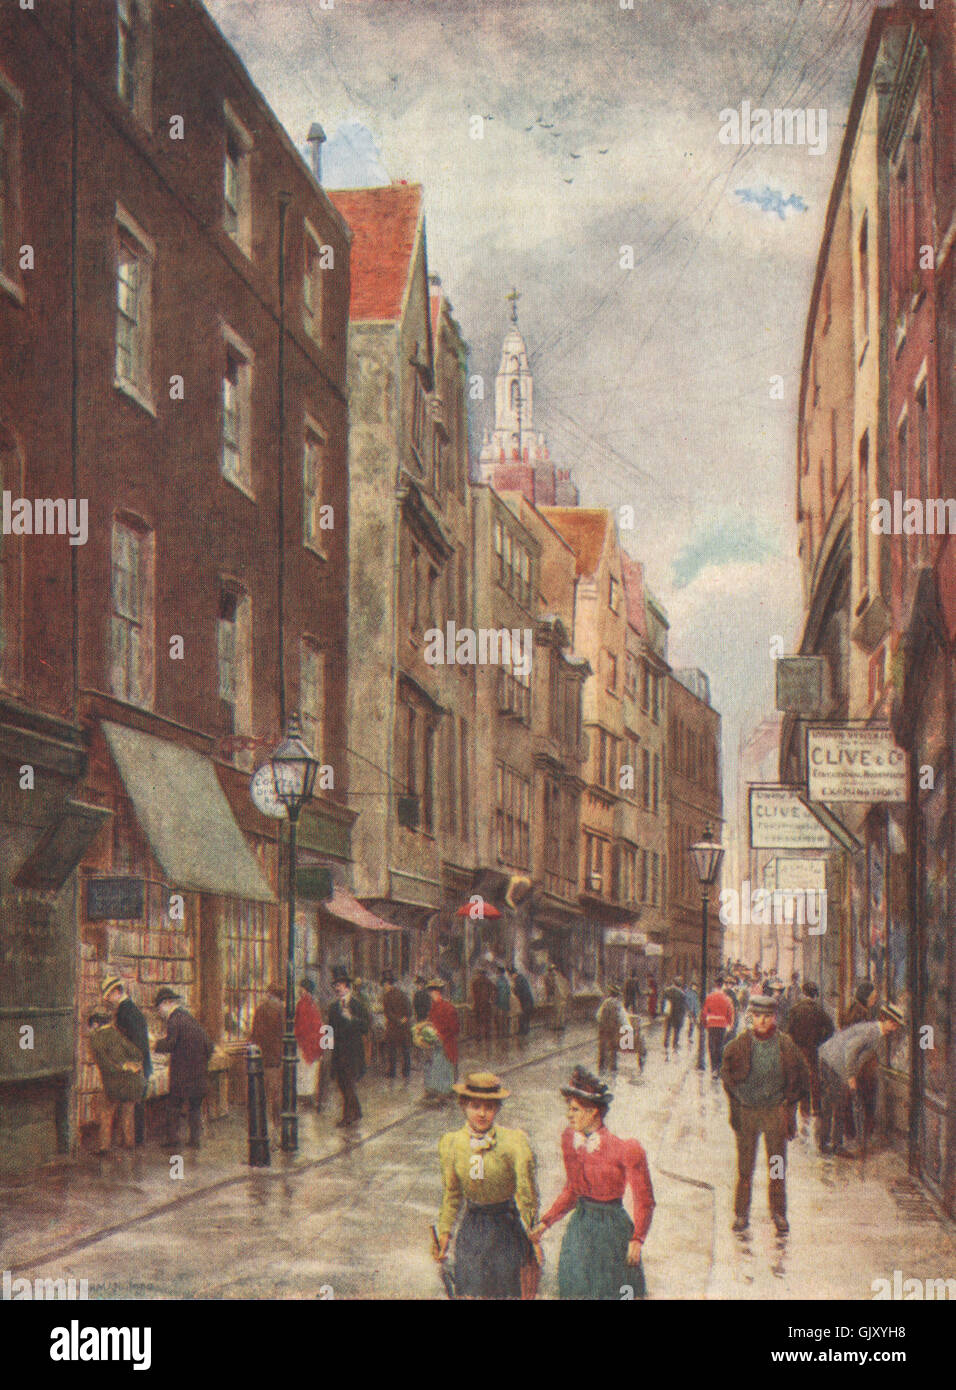 'Holywell Street, Strand, 1900' by Philip Norman. Vanished London, print 1905 Stock Photo